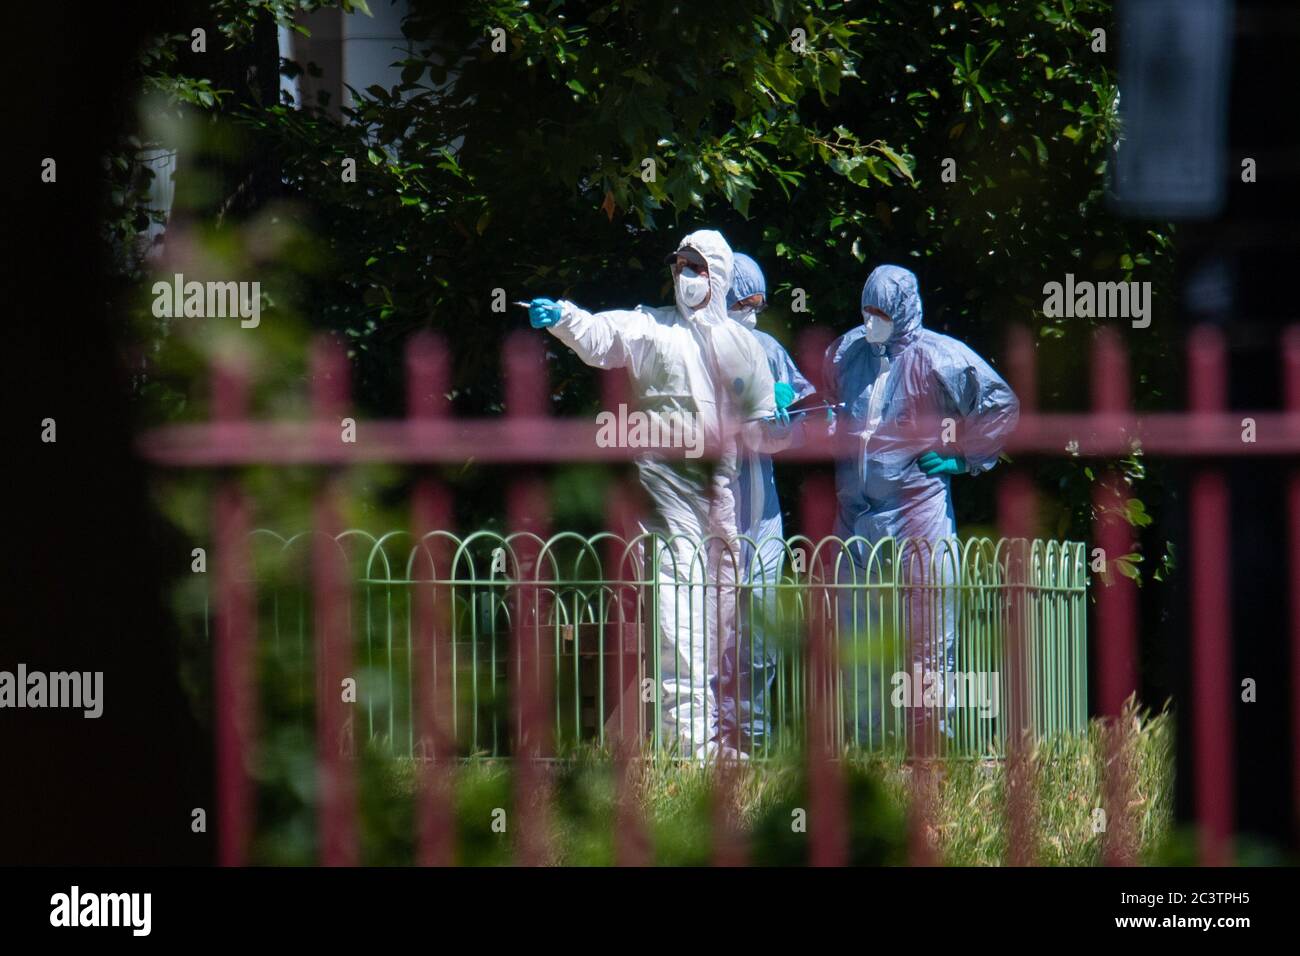 Police forensics officers at work in Forbury Gardens, in Reading town centre, the scene of a multiple stabbing attack which took place at around 7pm on Saturday, leaving three people dead and another three seriously injured. Stock Photo